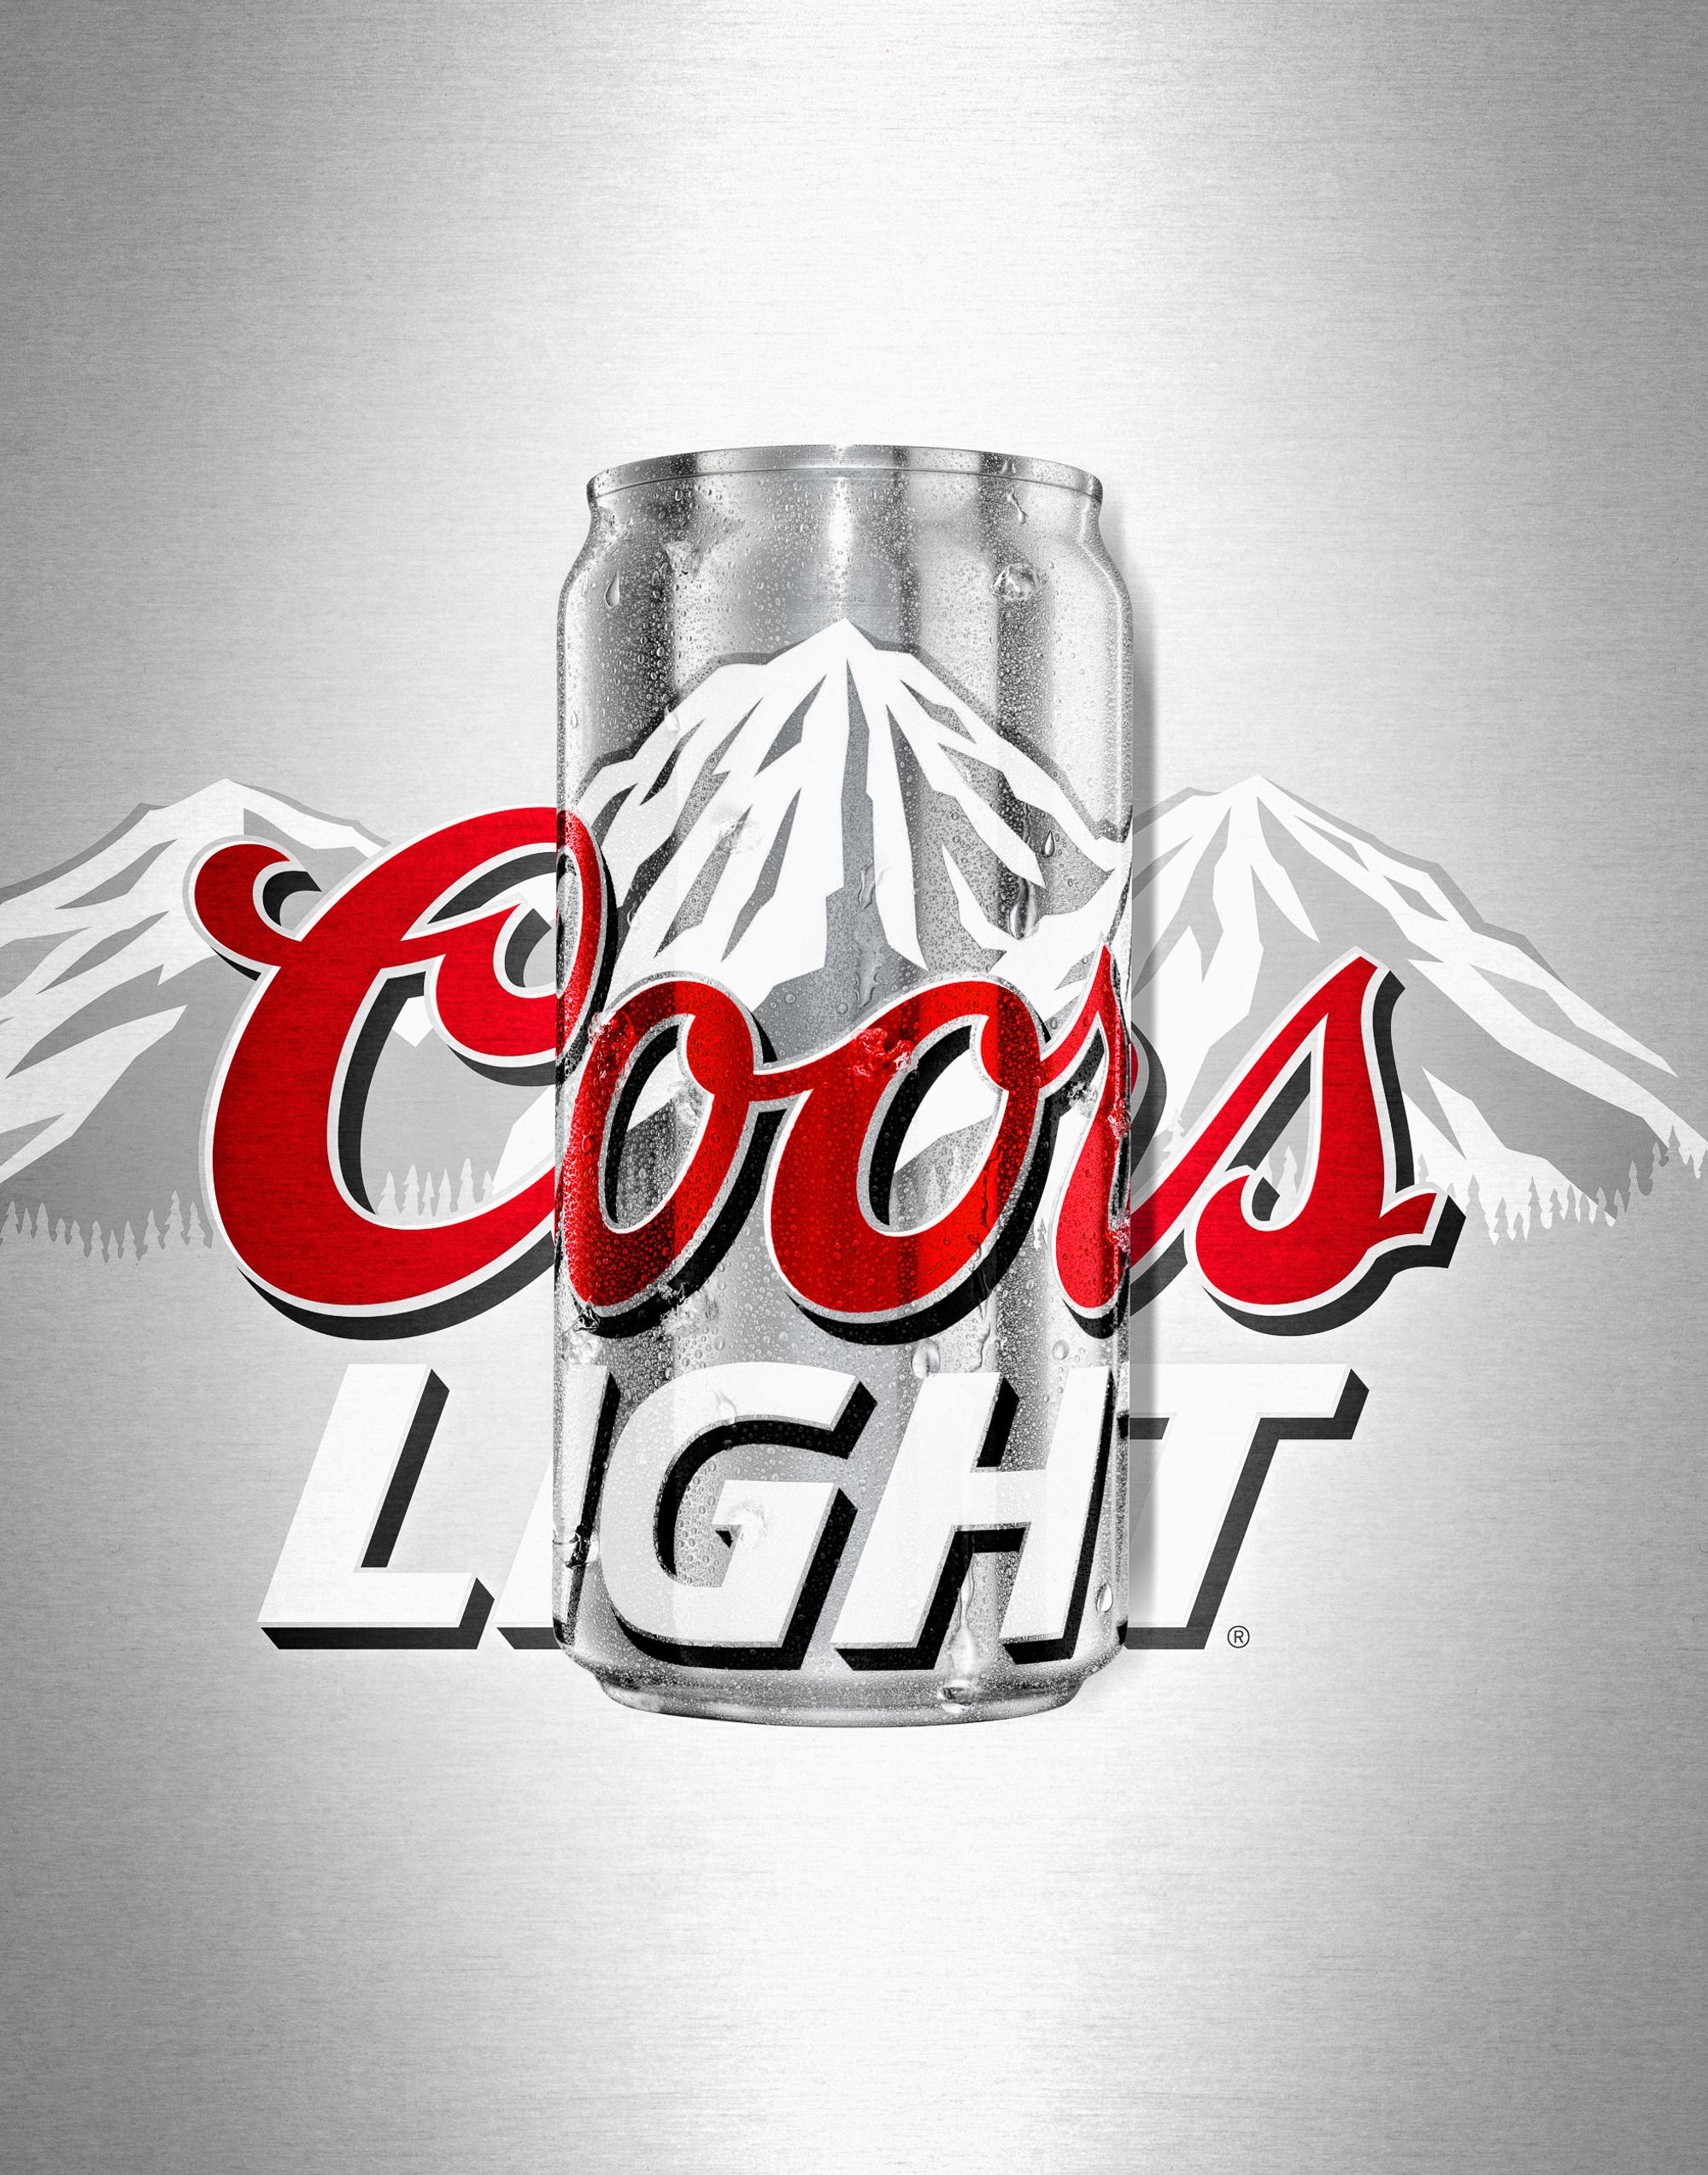 Coors Light Beer cans. Beverage & Liquor product advertising photography by Timothy Hogan Studio in Los Angeles